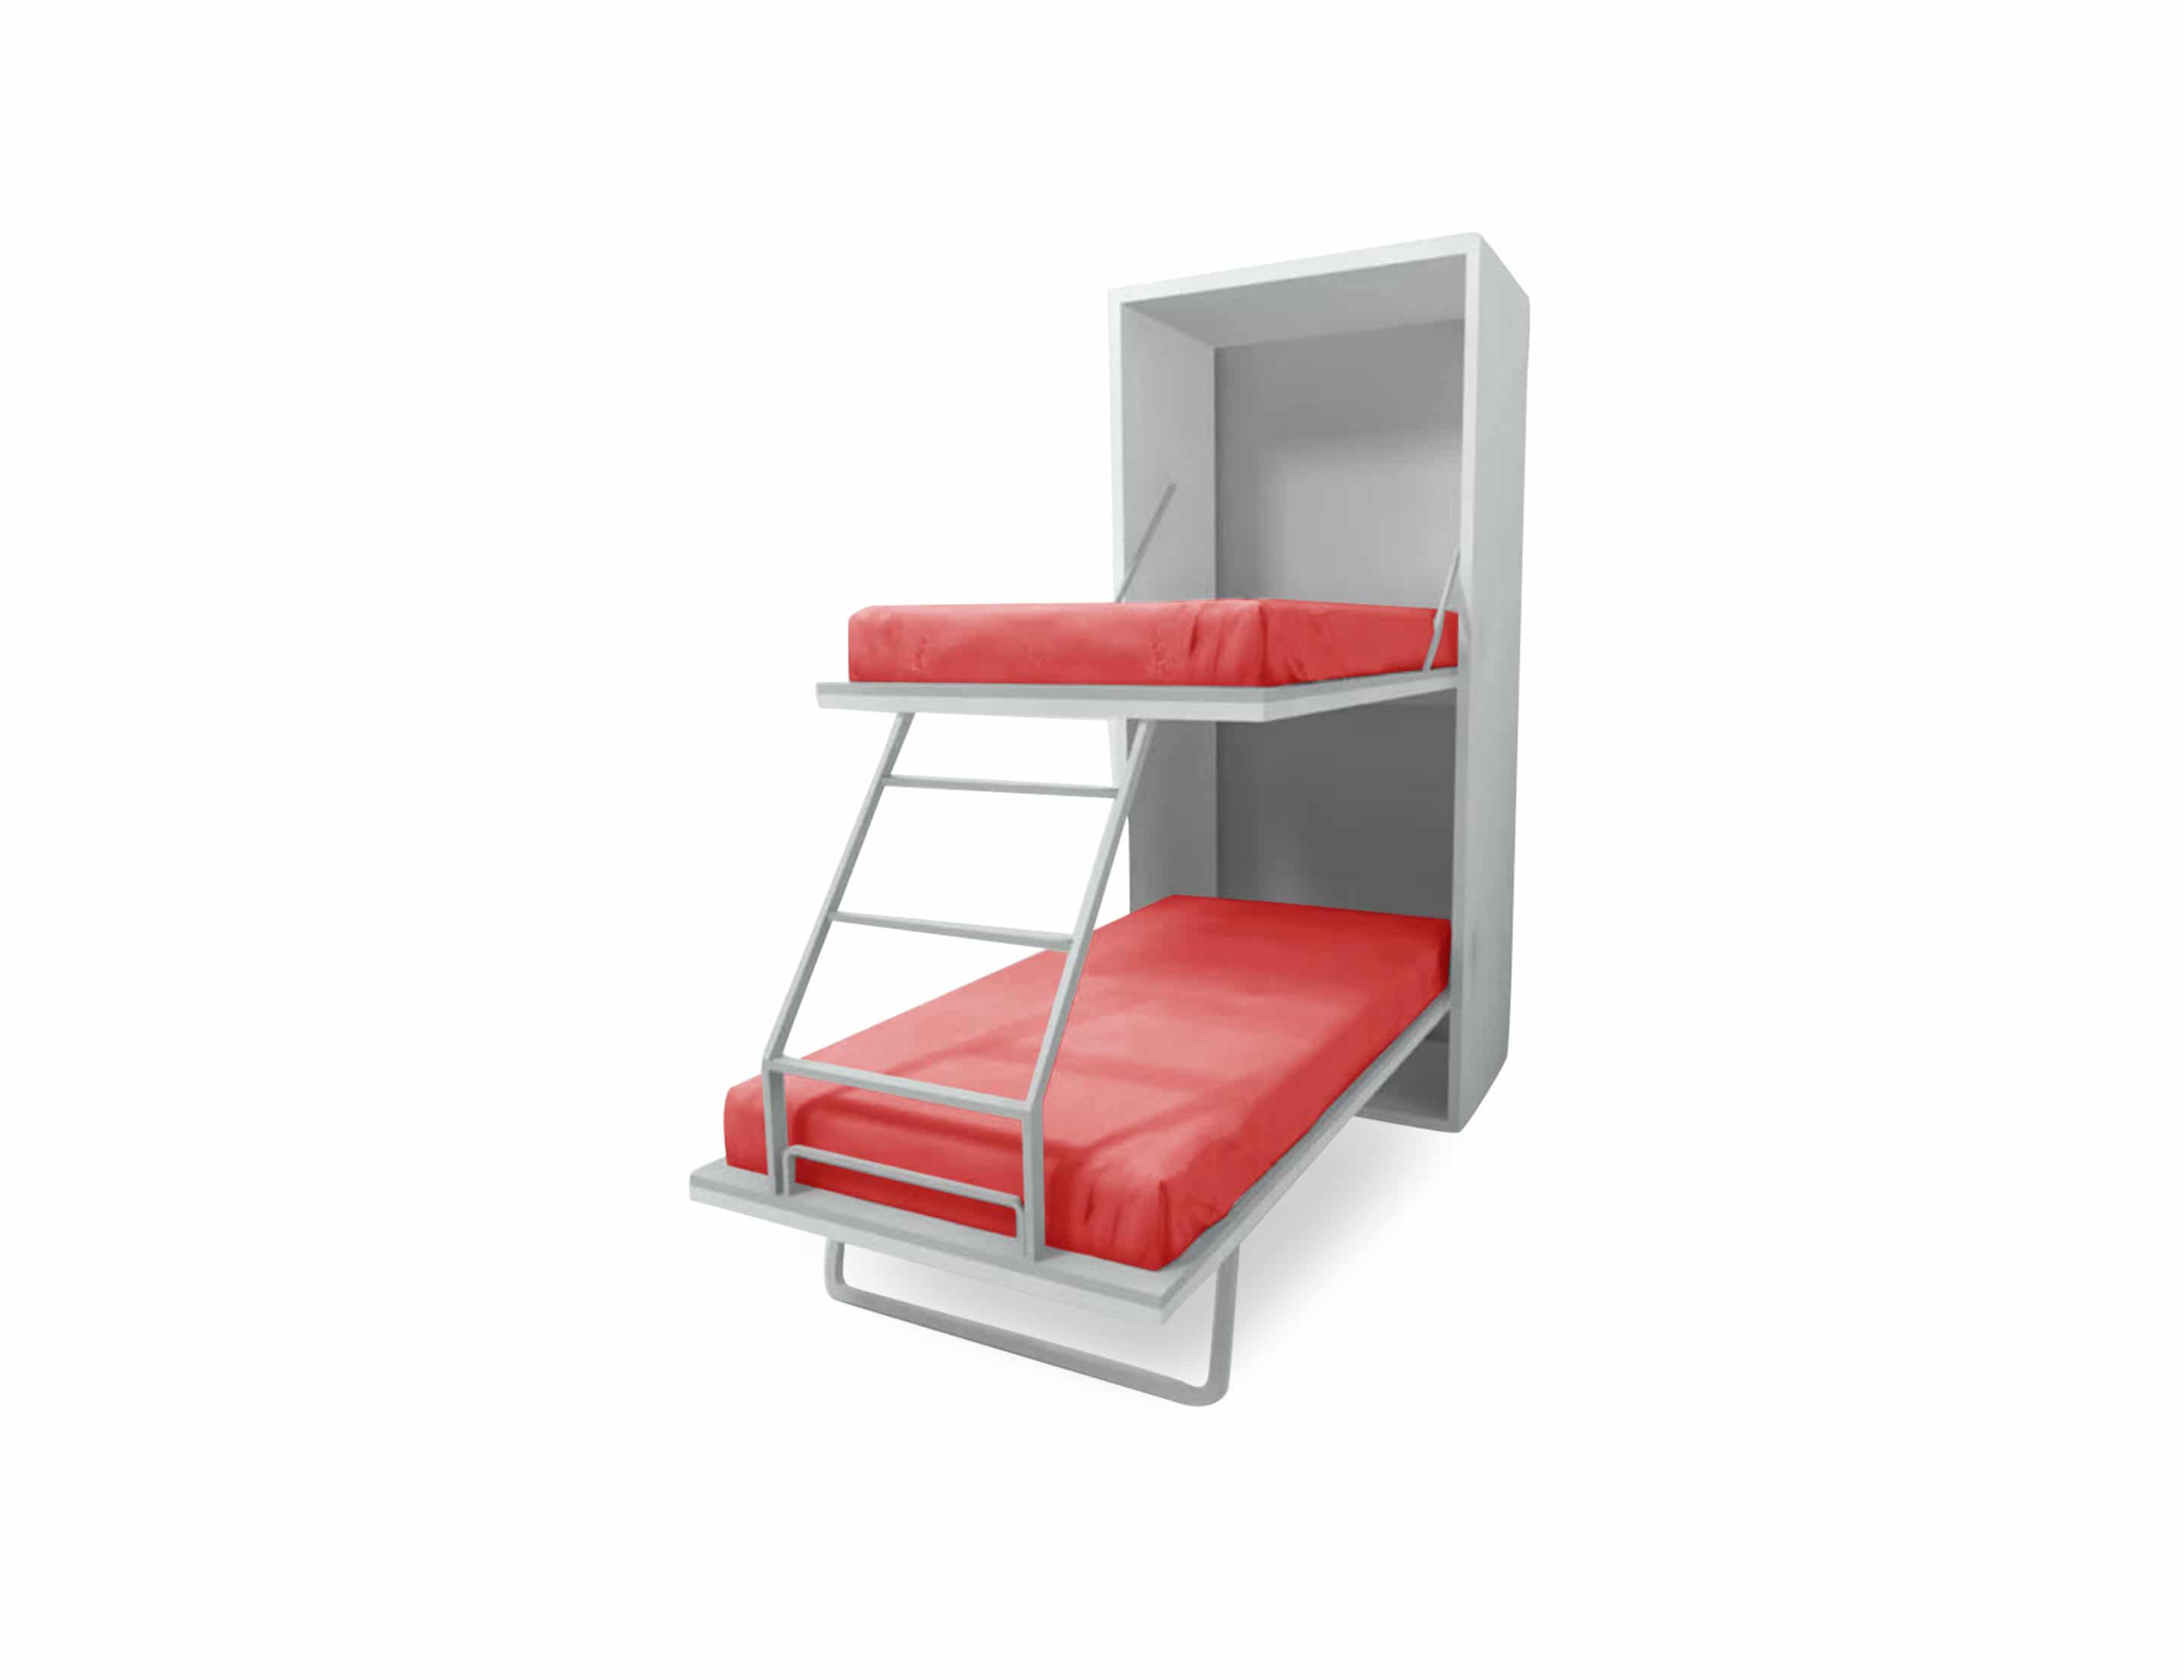 Vertical Murphy Bunk Beds, Bunk Beds With Extra Pull Out Bed